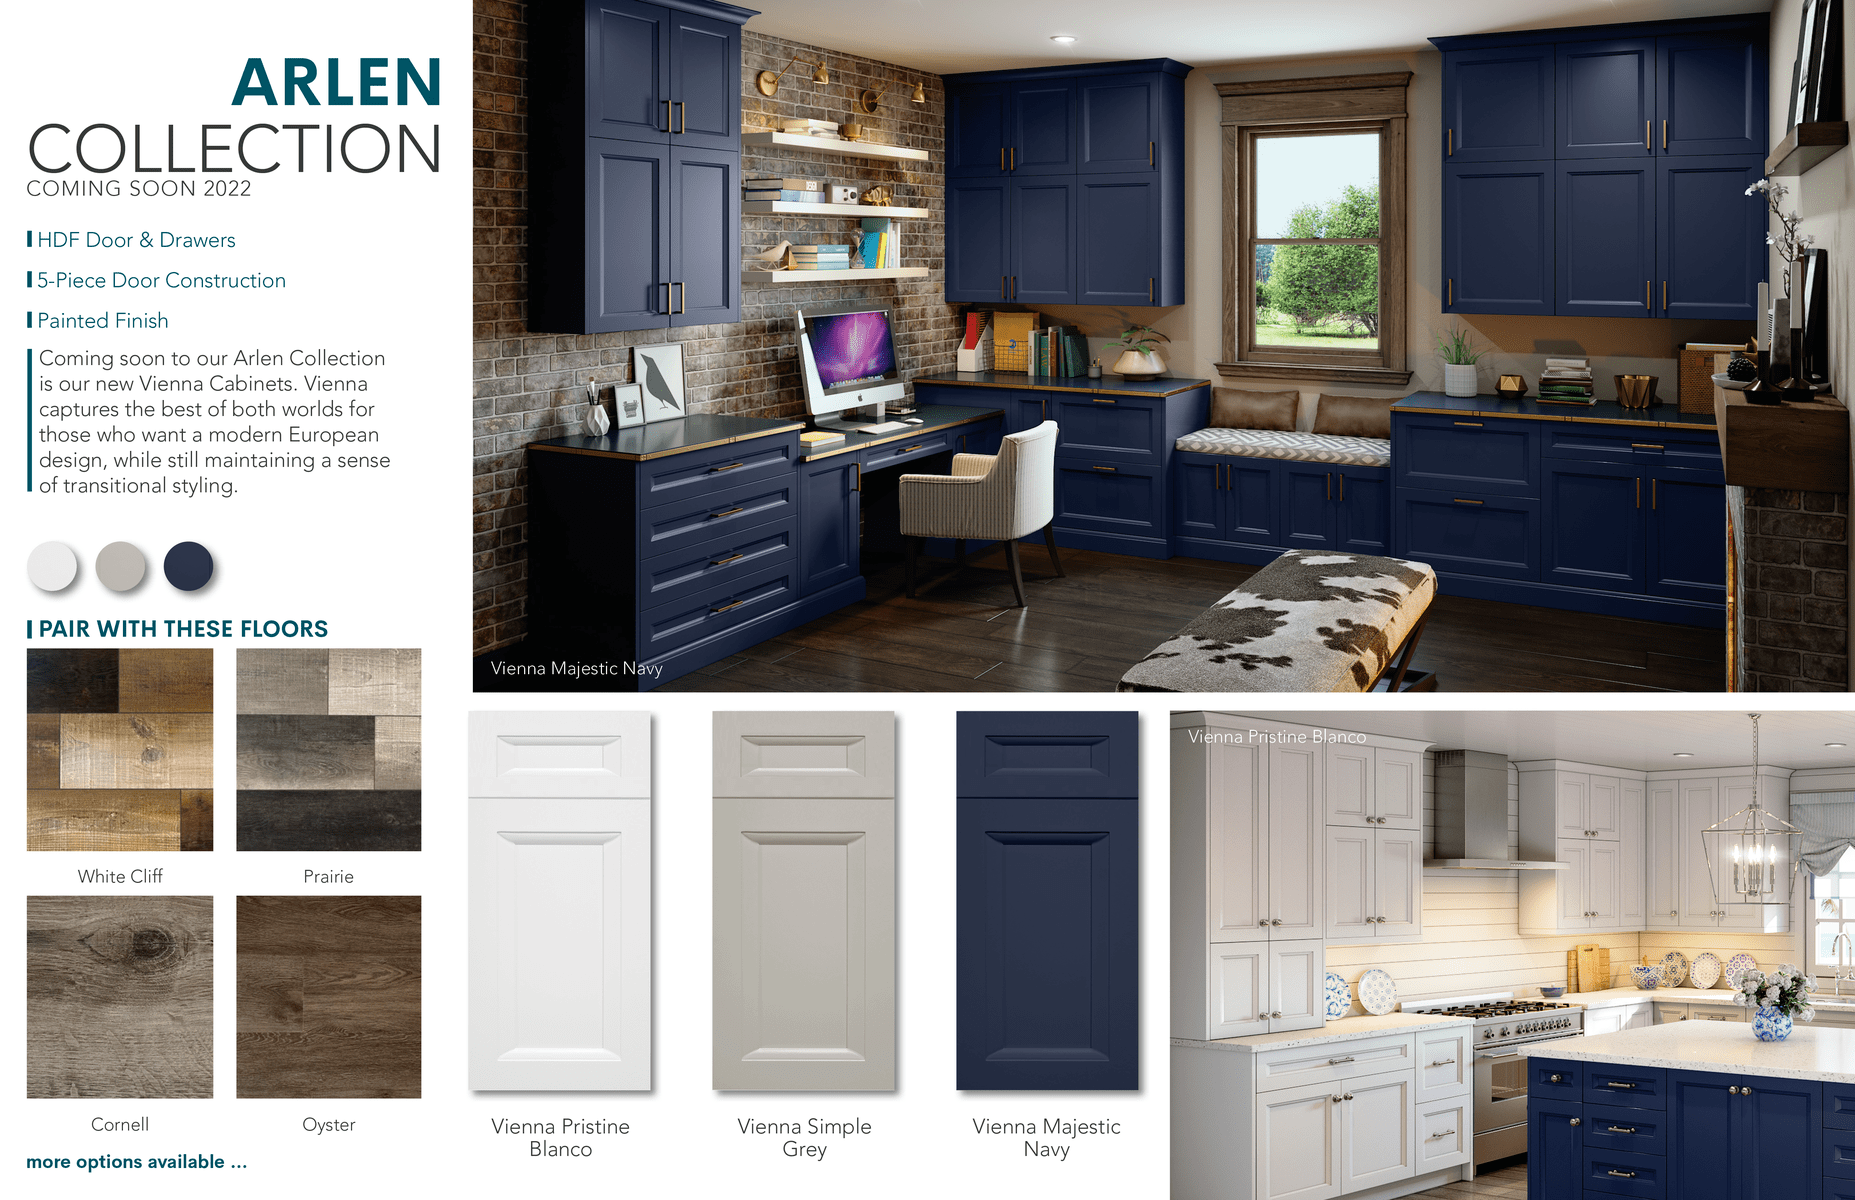 The best 2022 cabinet color trends at your fingertips. See the top